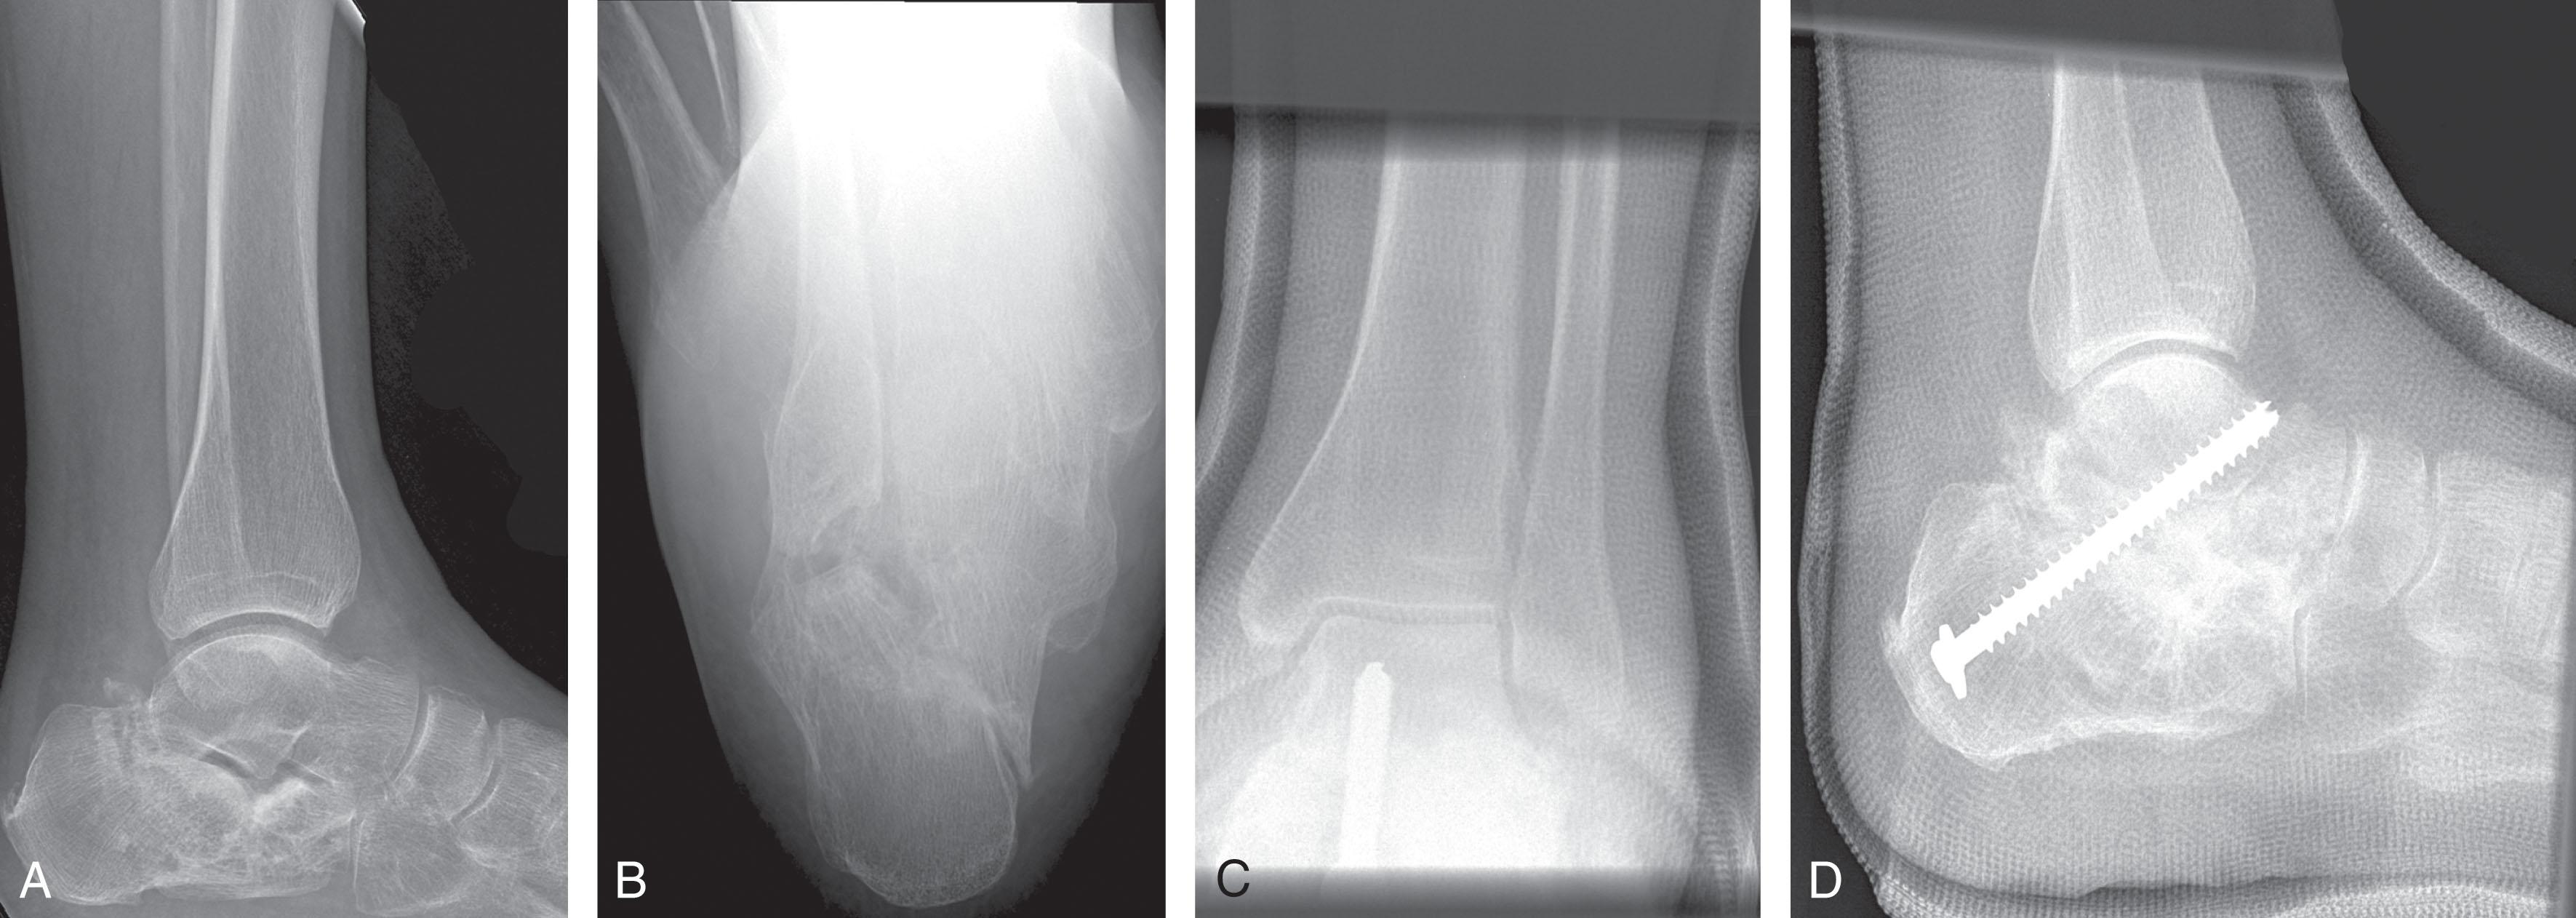 Fig. 25-8, Distraction subtalar arthrodesis for calcaneal malunion and subtalar arthritis. A and B , Lateral and axial views of calcaneal fracture malunion with loss of calcaneal height. C and D , Anteroposterior and lateral views after distraction subtalar fusion using a bone block to restore calcaneal height and restore talar inclination.